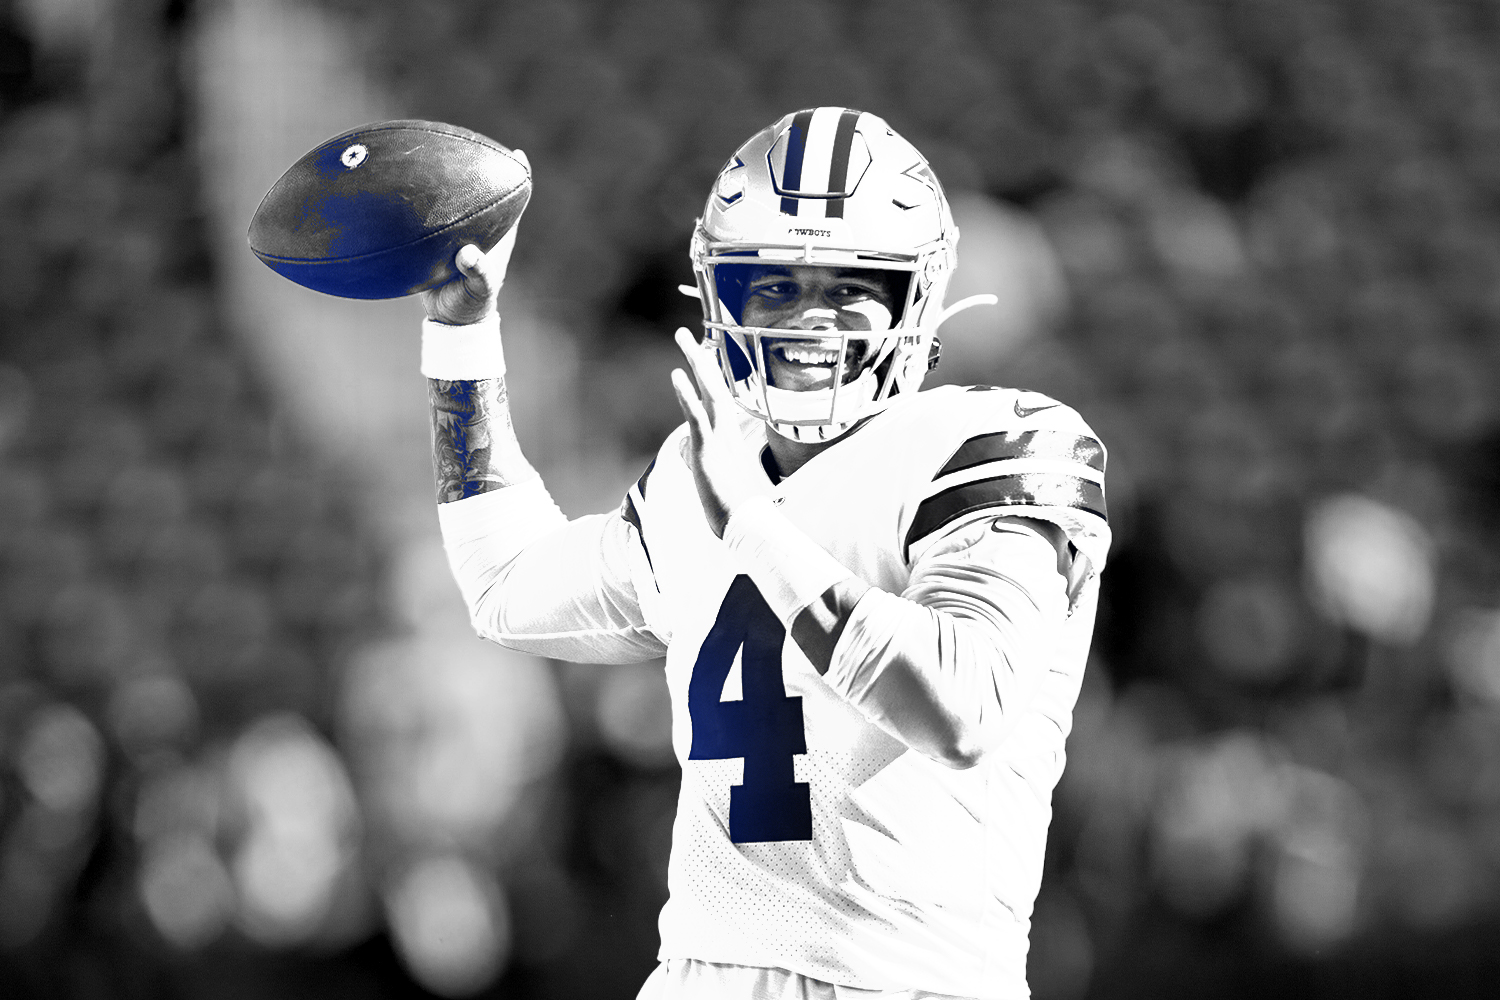 NFL on FOX - Dak Prescott and the Jordan Brand have agreed on a